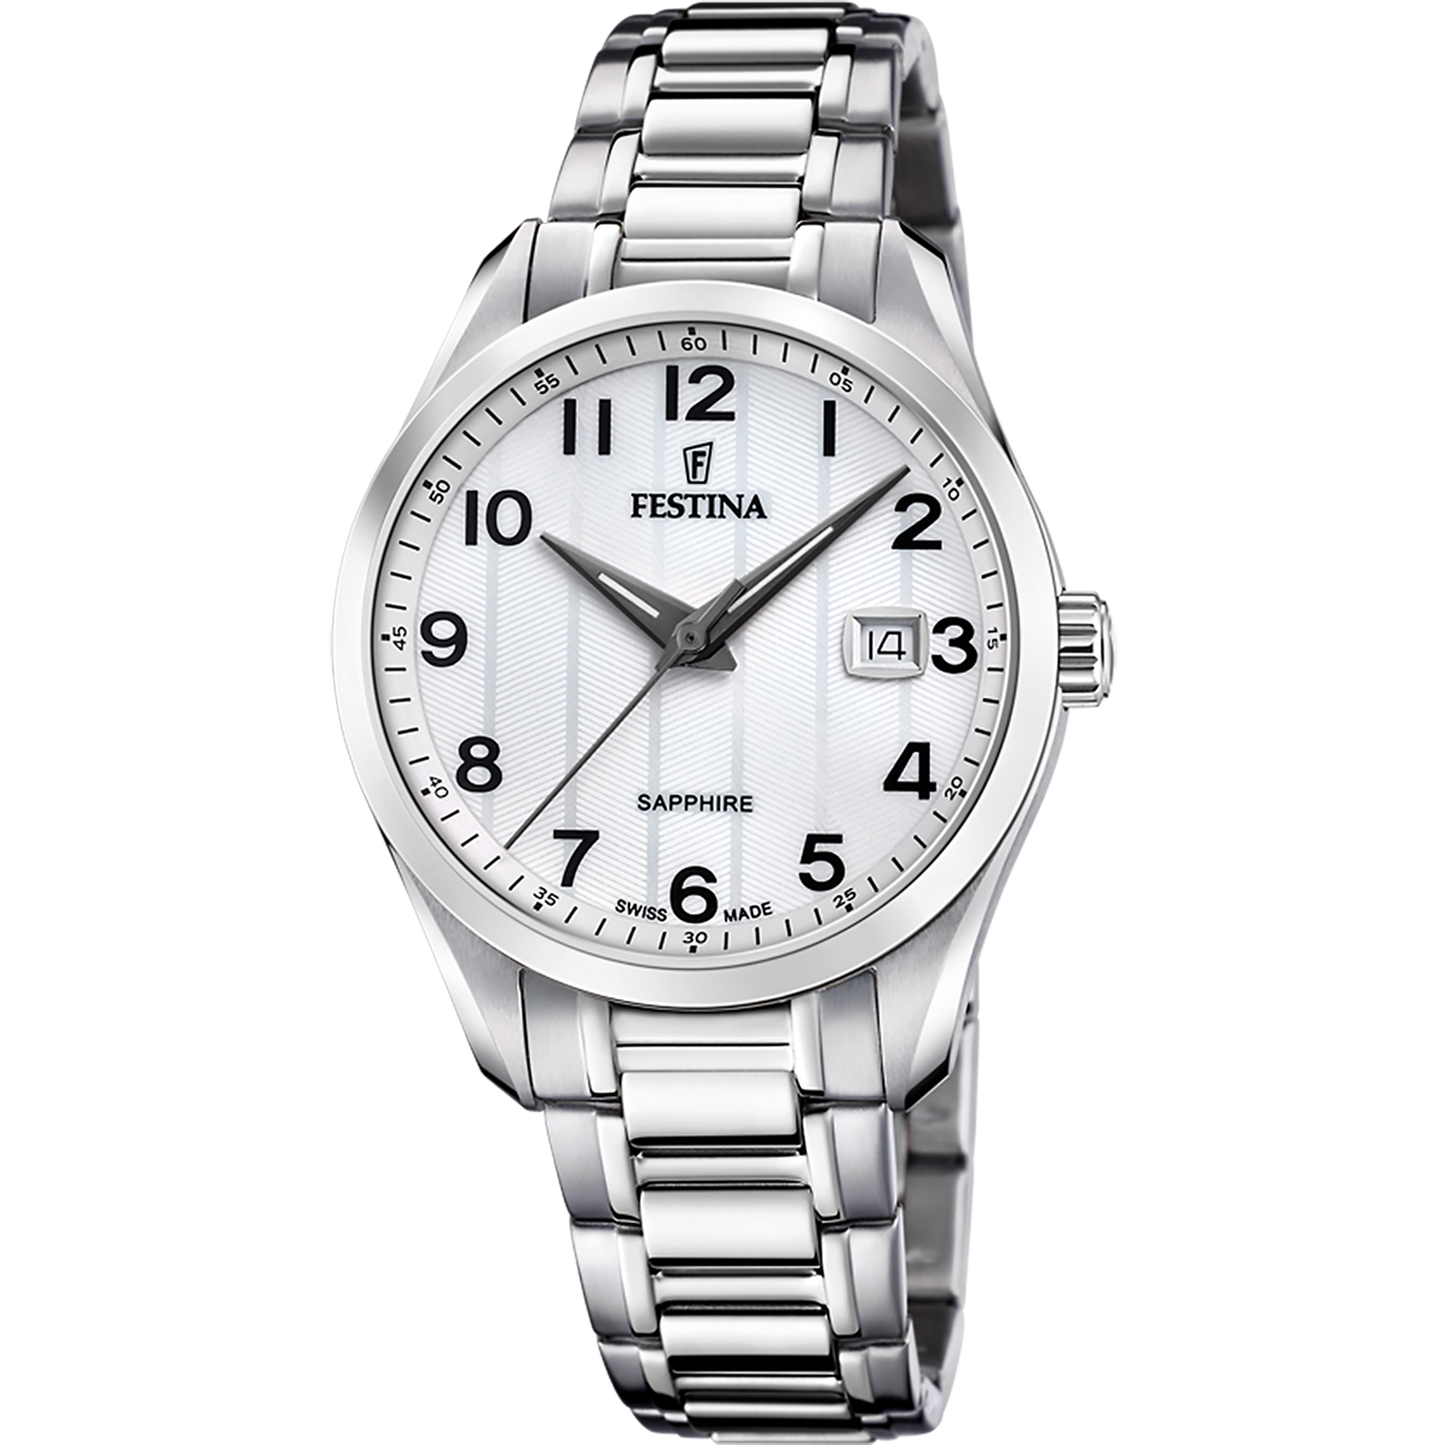 Festina Swiss Made F20026-1 - Analog - Strap Material Stainless Steel I Festina Watches USA